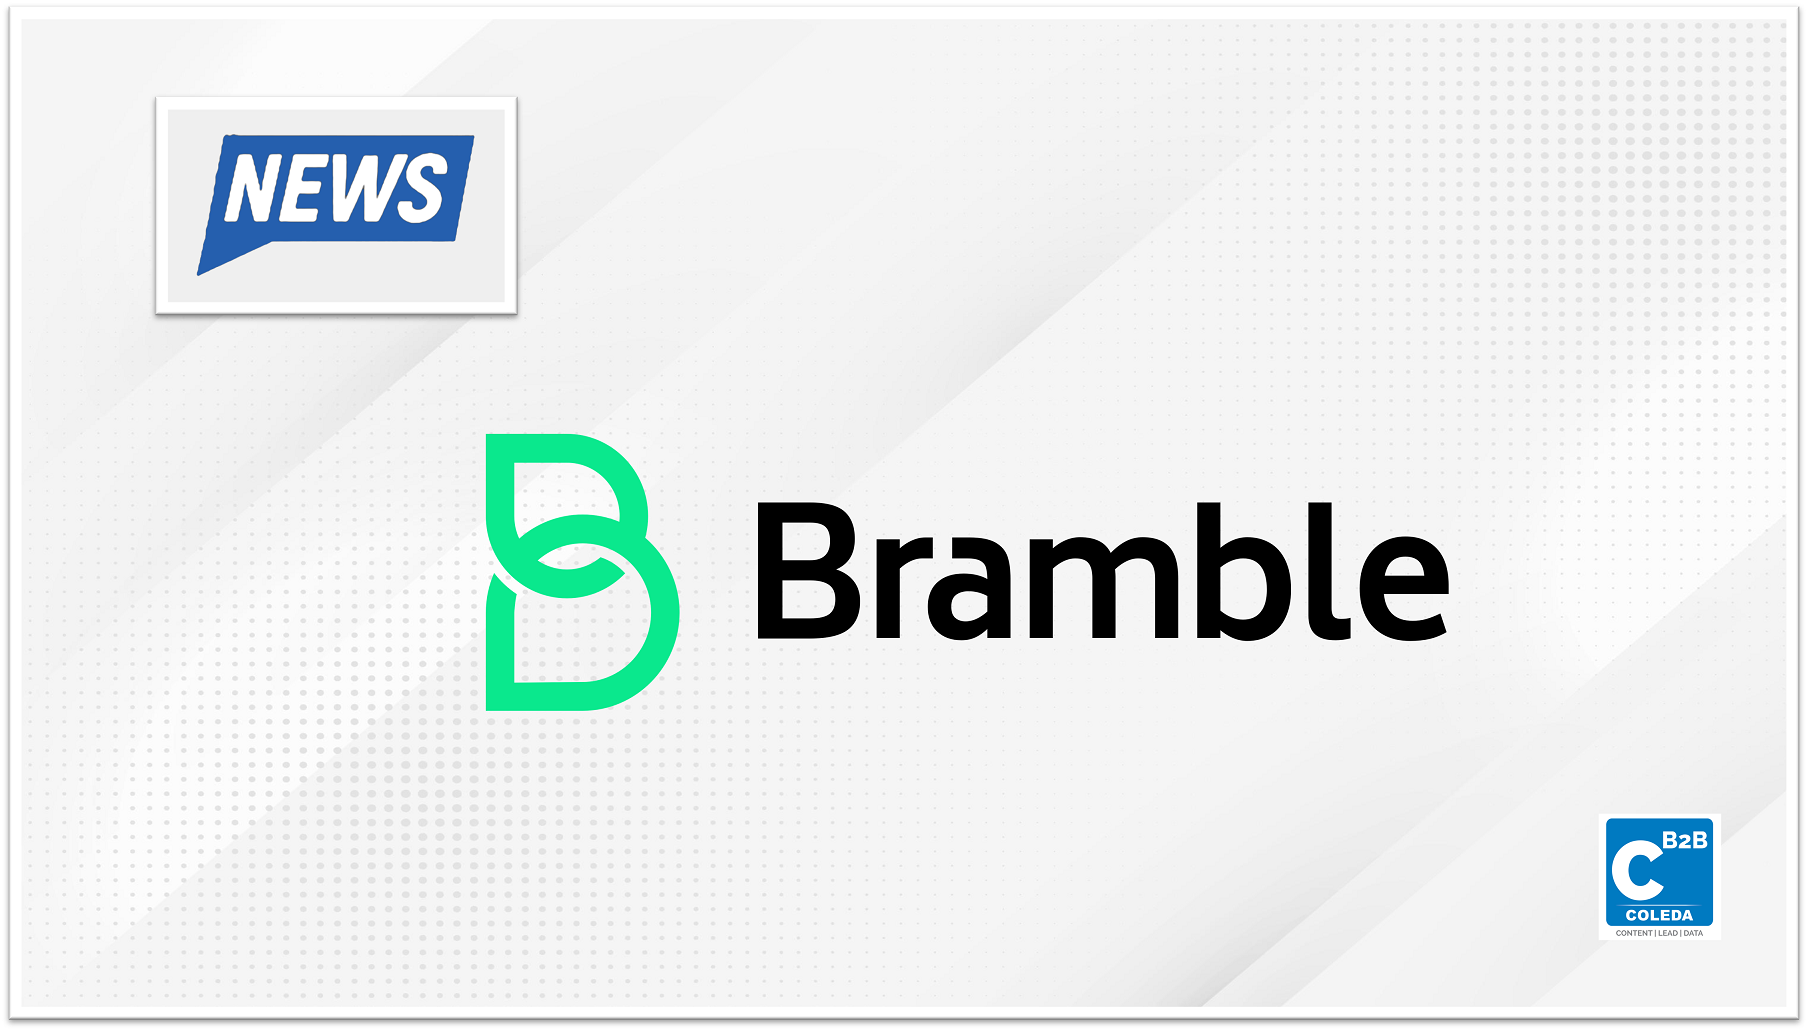 Bramble announces the appointment of Jeff Immelt to its Advisory board